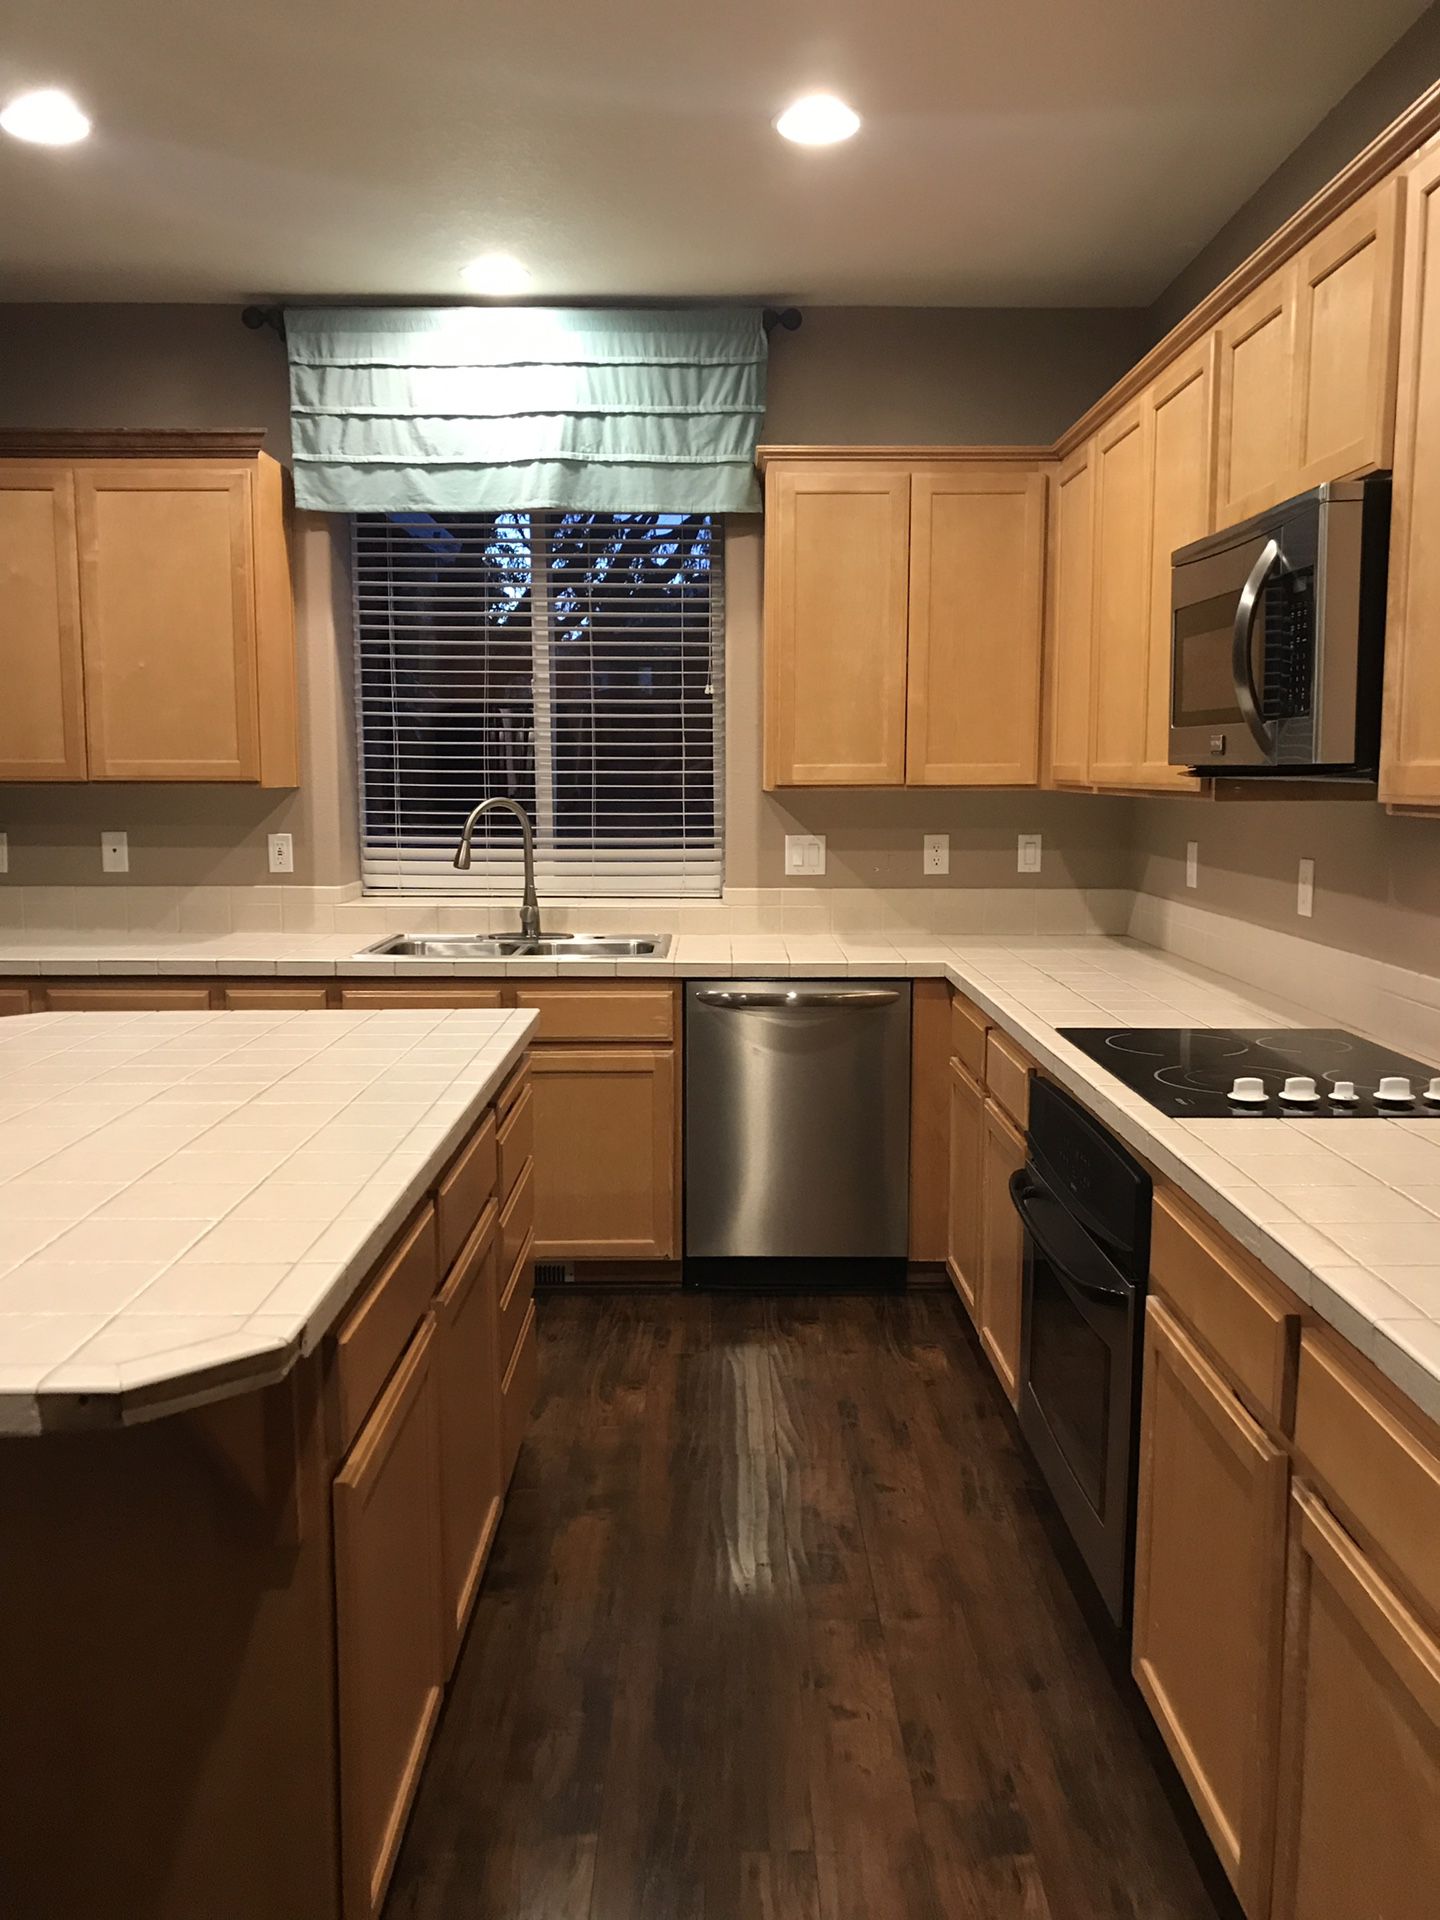 Kitchen cabinets and appliances